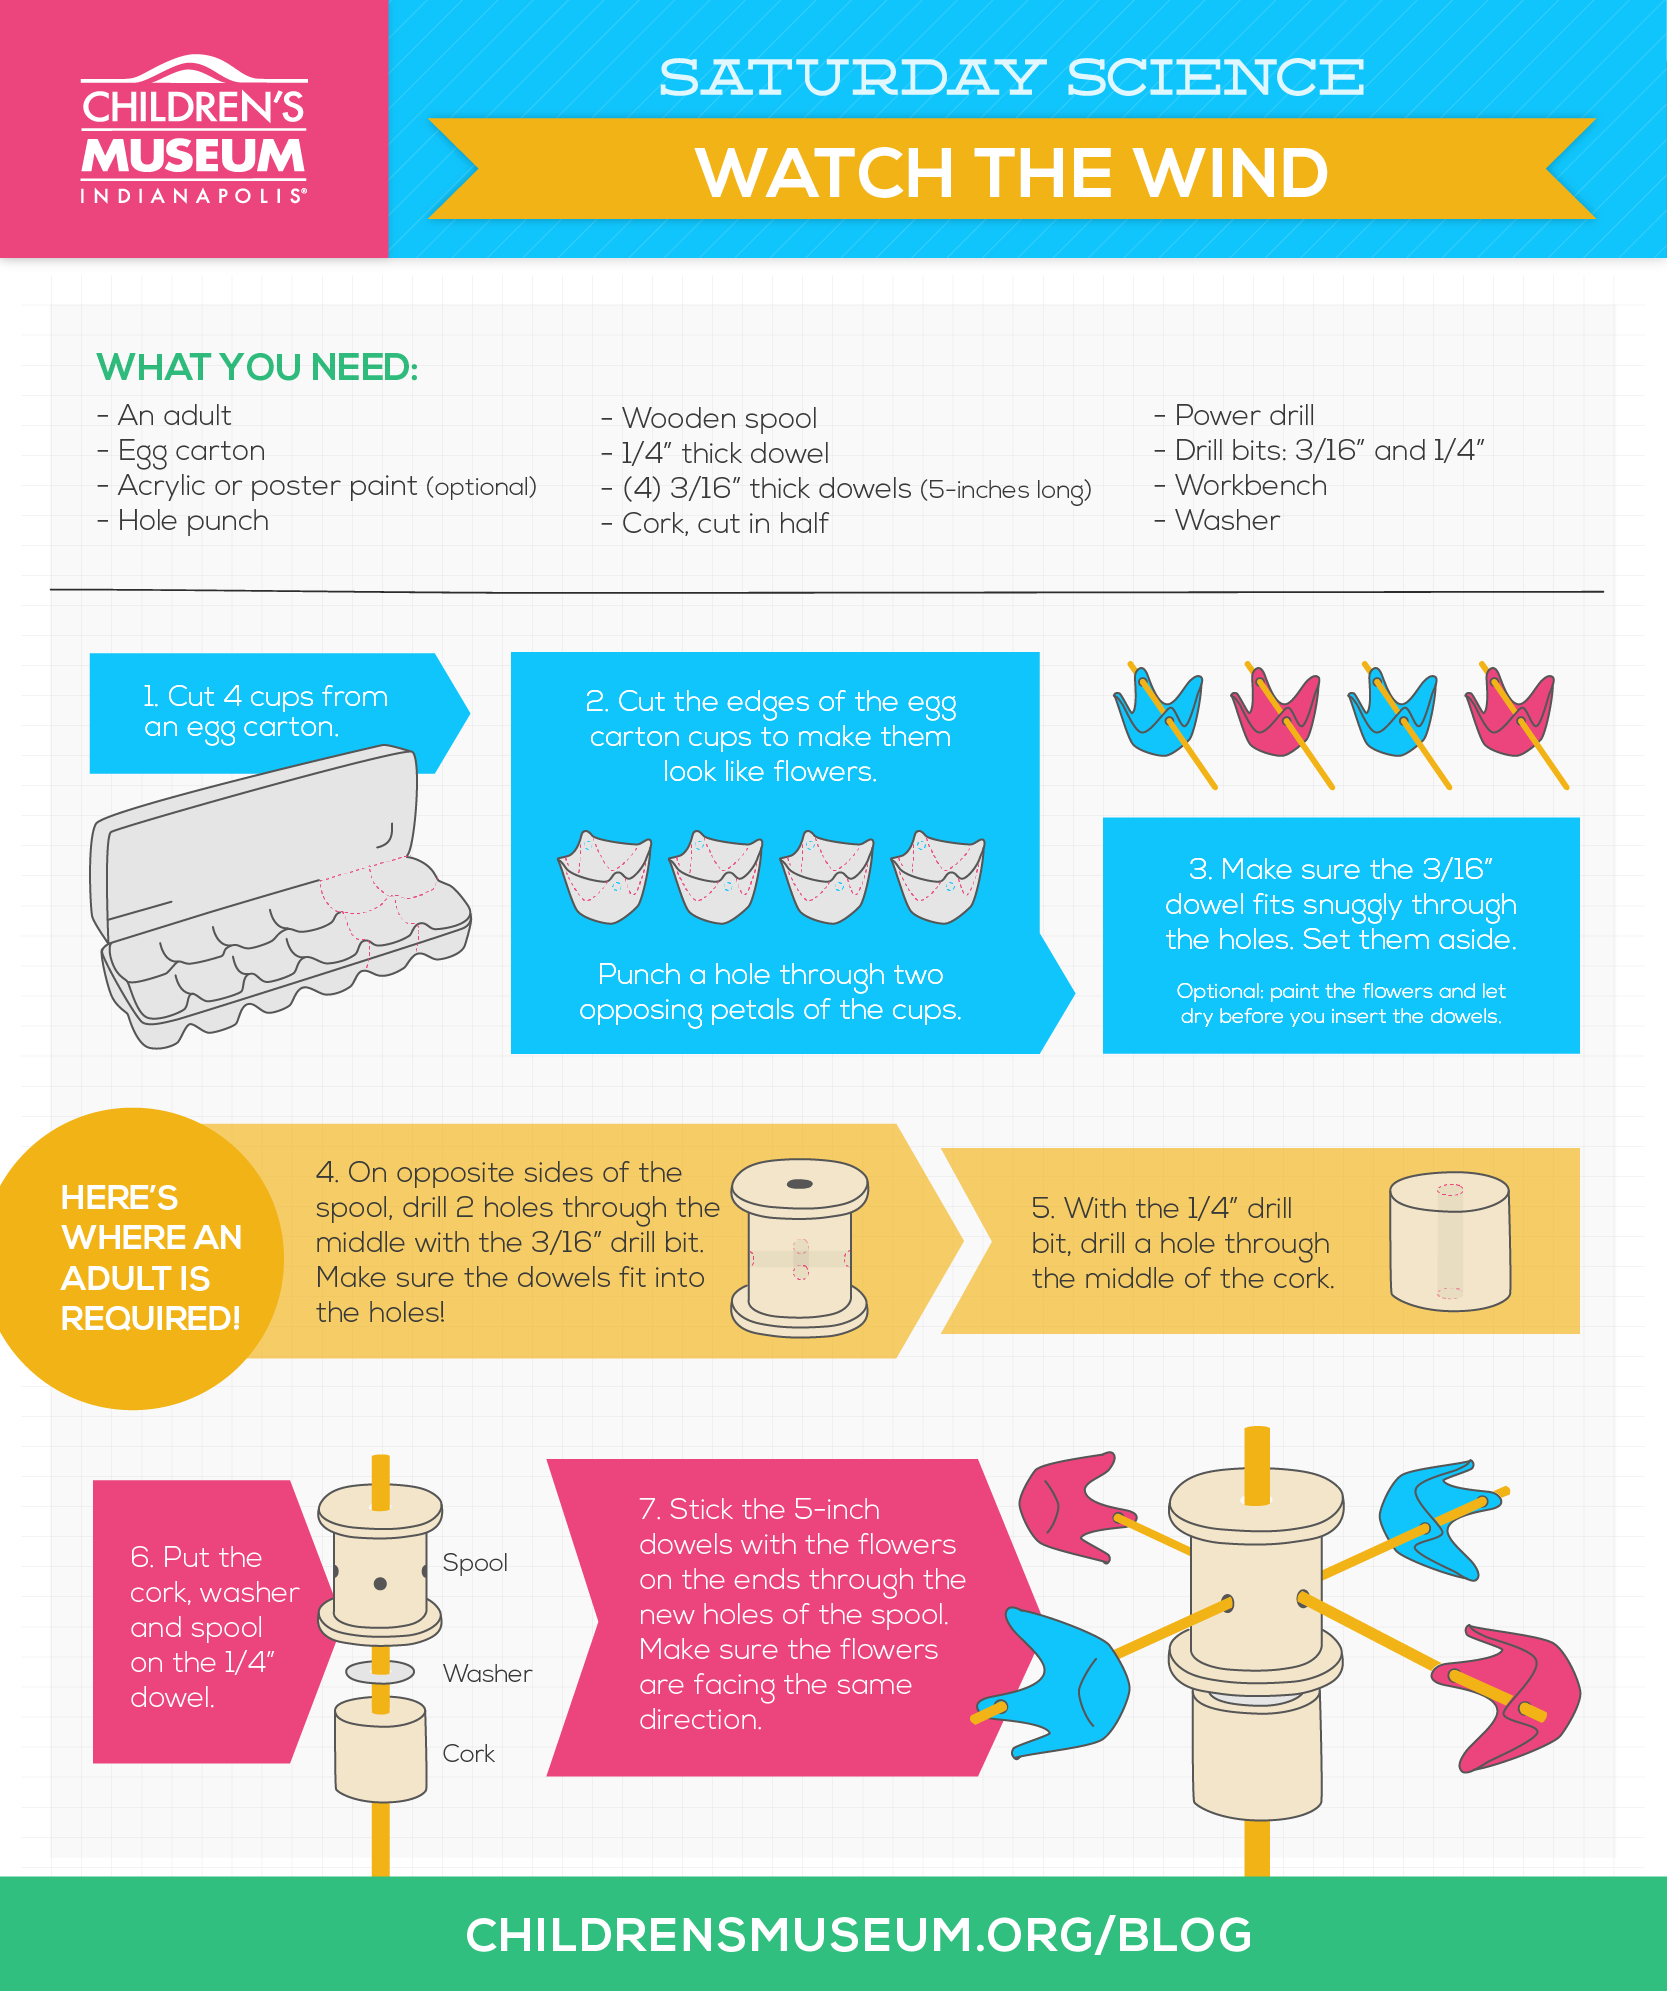 Saturday Science: Watch the Wind